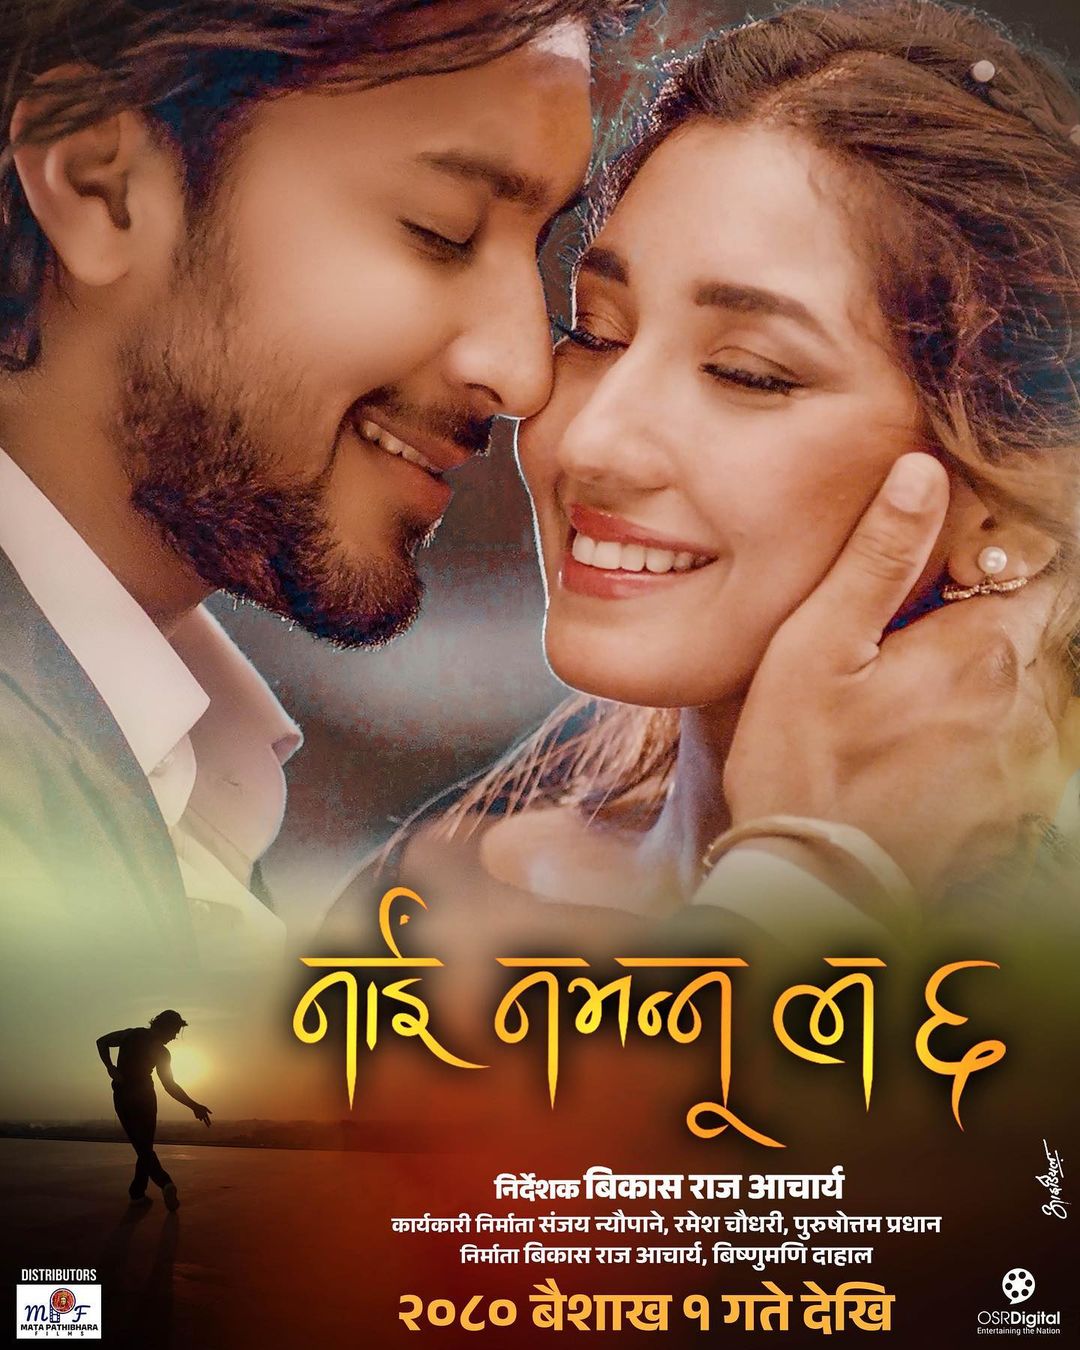 Nai Na Bhanu La 6 Movie (2023) Cast, Release Date, Story, Budget, Collection, Poster, Trailer, Review